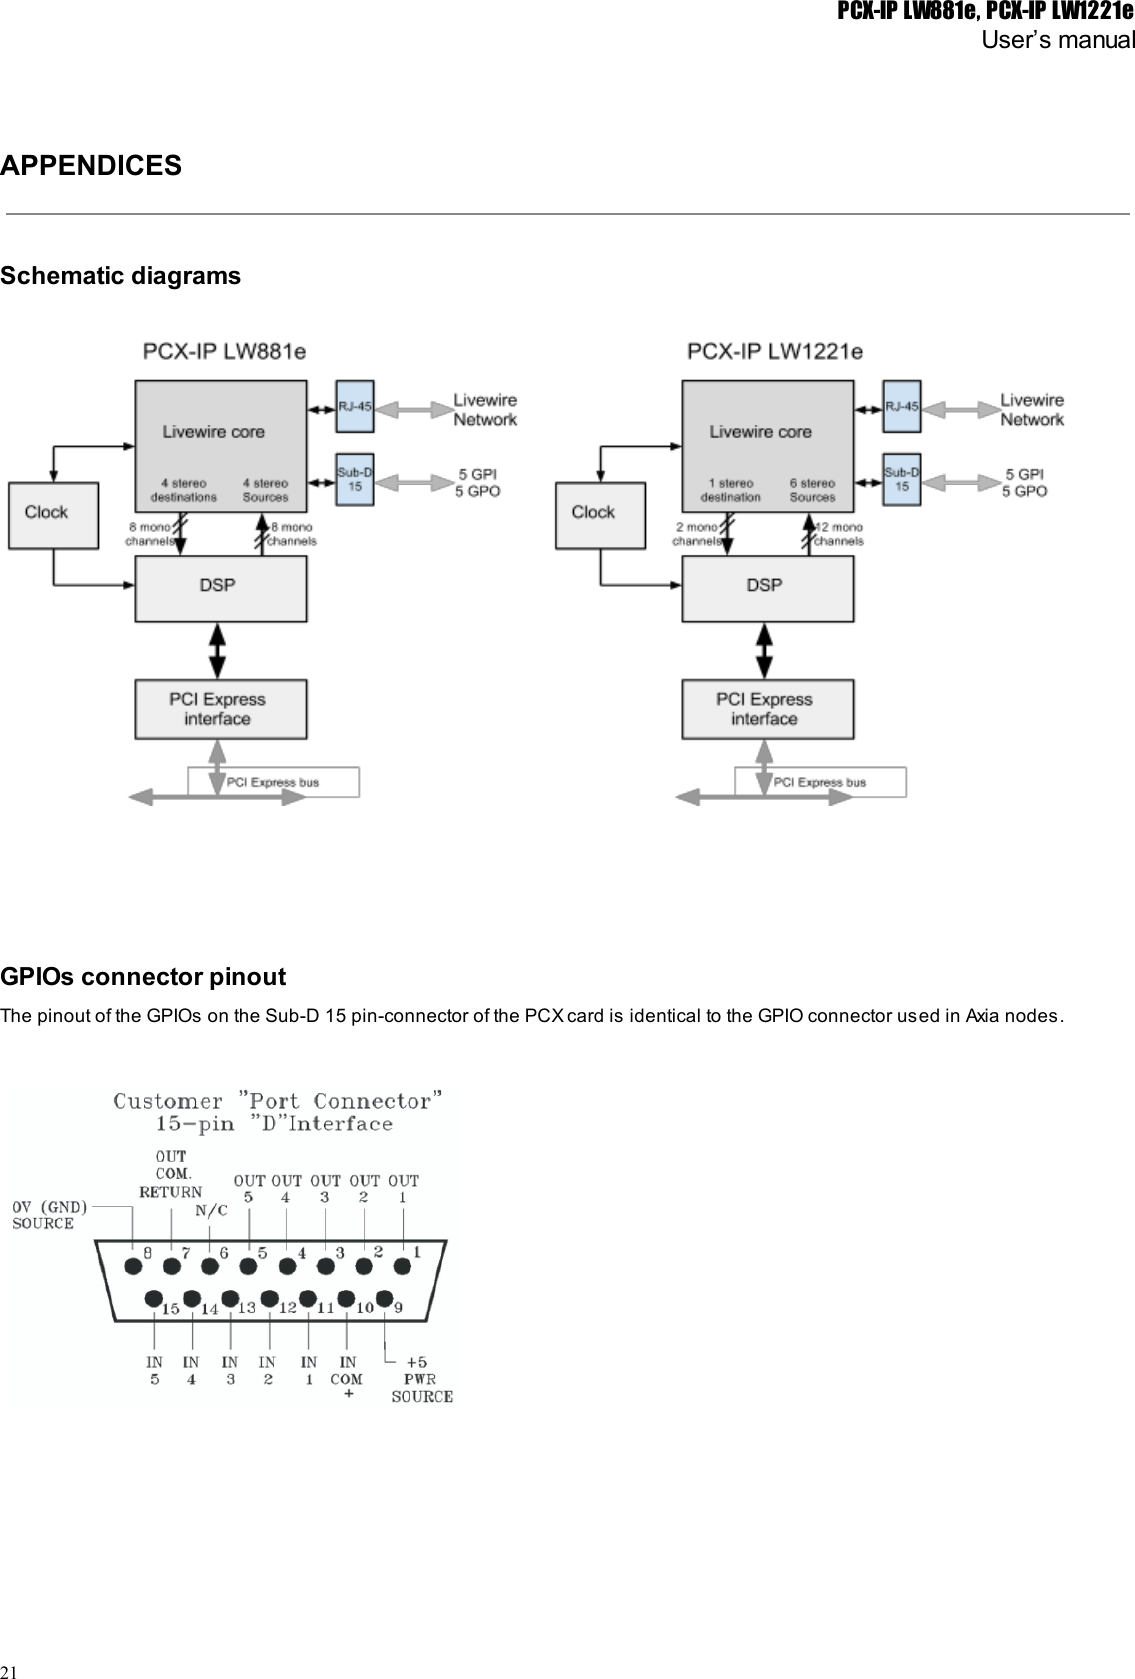 PCX-IP LW881e, PCX-IP LW1221eUser’s manualAPPENDICESSchematic diagrams GPIOs connector pinoutThe pinout of the GPIOs on the Sub-D 15 pin-connector of the PCX card is identical to the GPIO connector used in Axia nodes.21